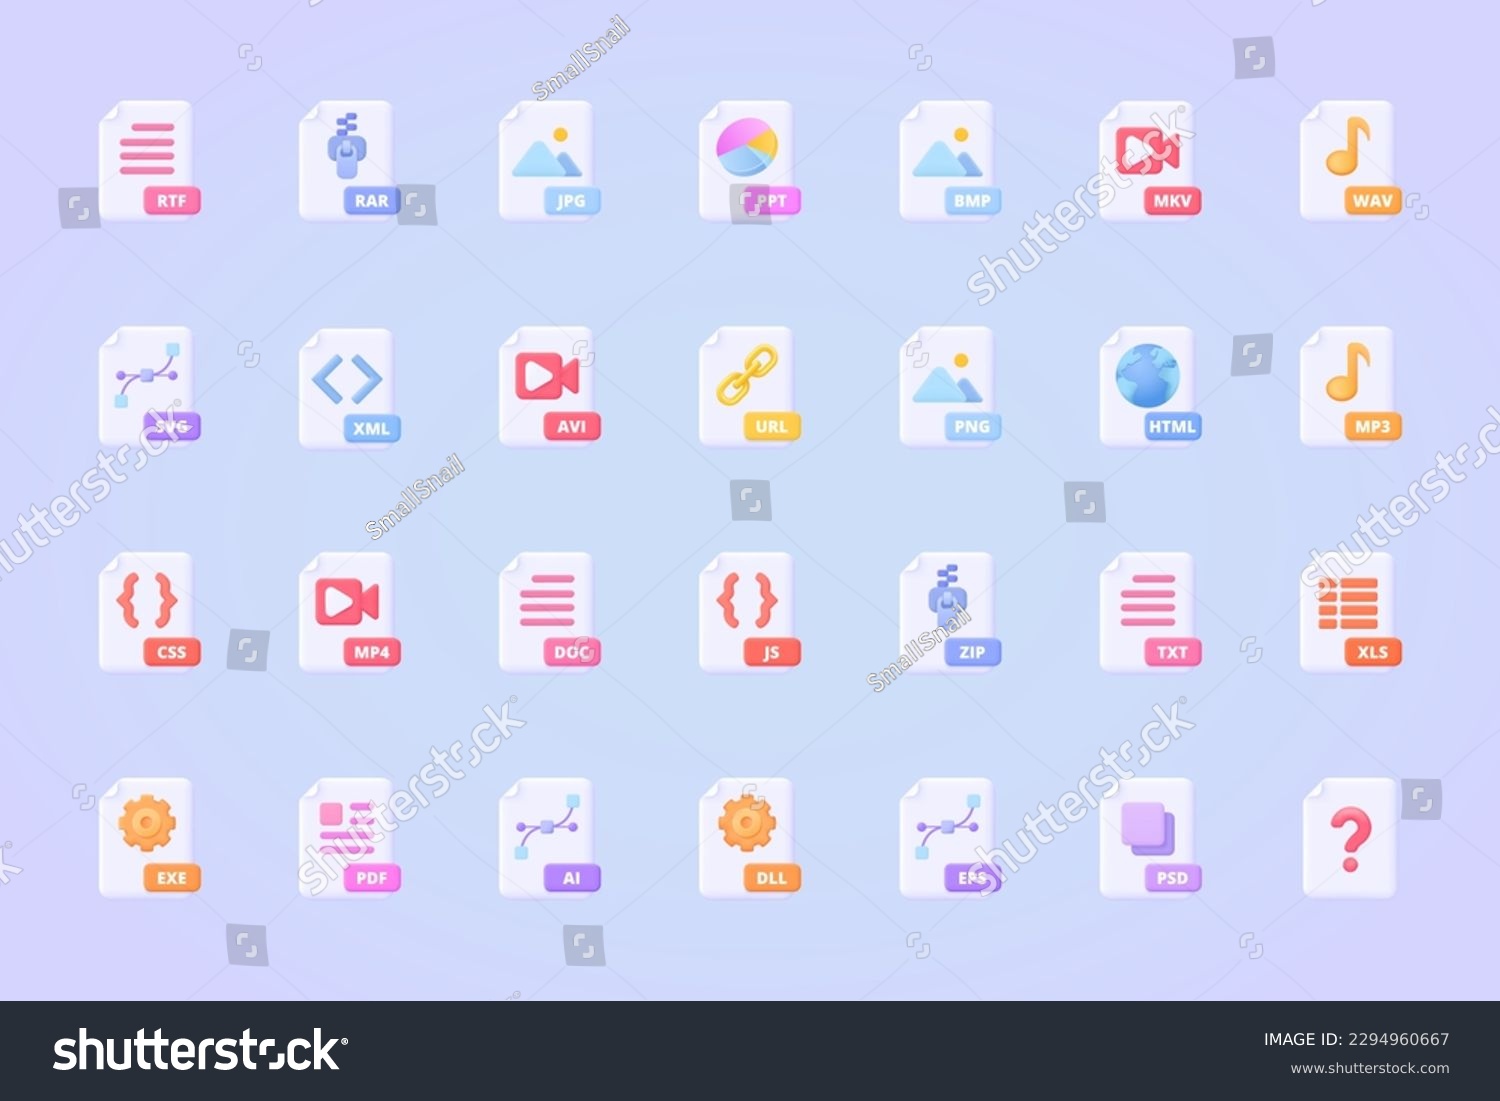 SVG of File type, document format icon set. Large file 3d vector icon collection  for website, print, banner, mobile or desktop application. Three dimensional vector colourful pictogram.  svg